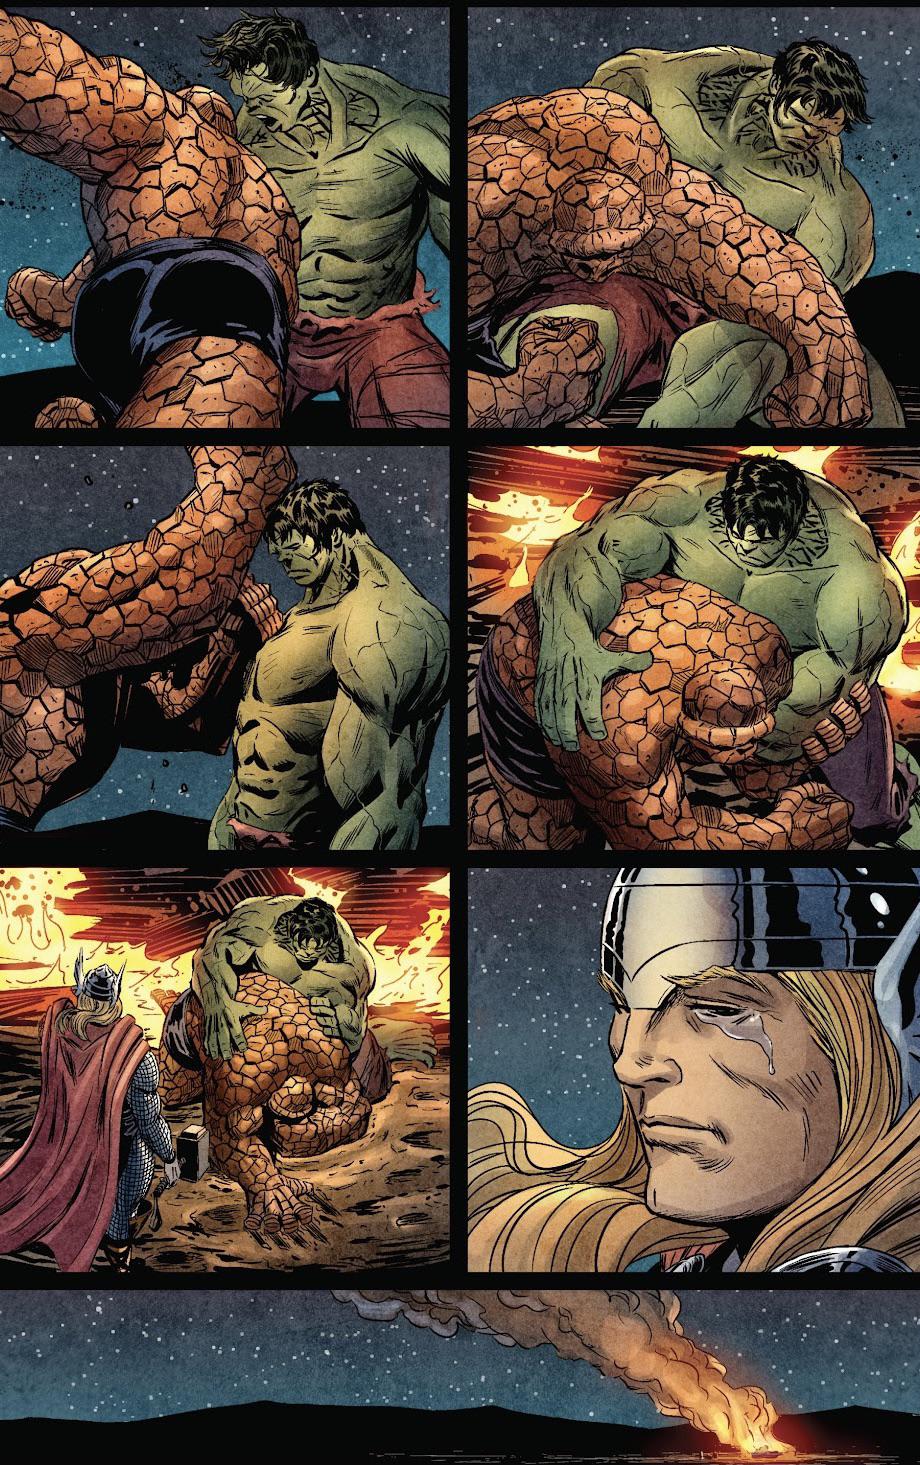 Such emotion in this page (Fantastic Four Vol 1 #588)